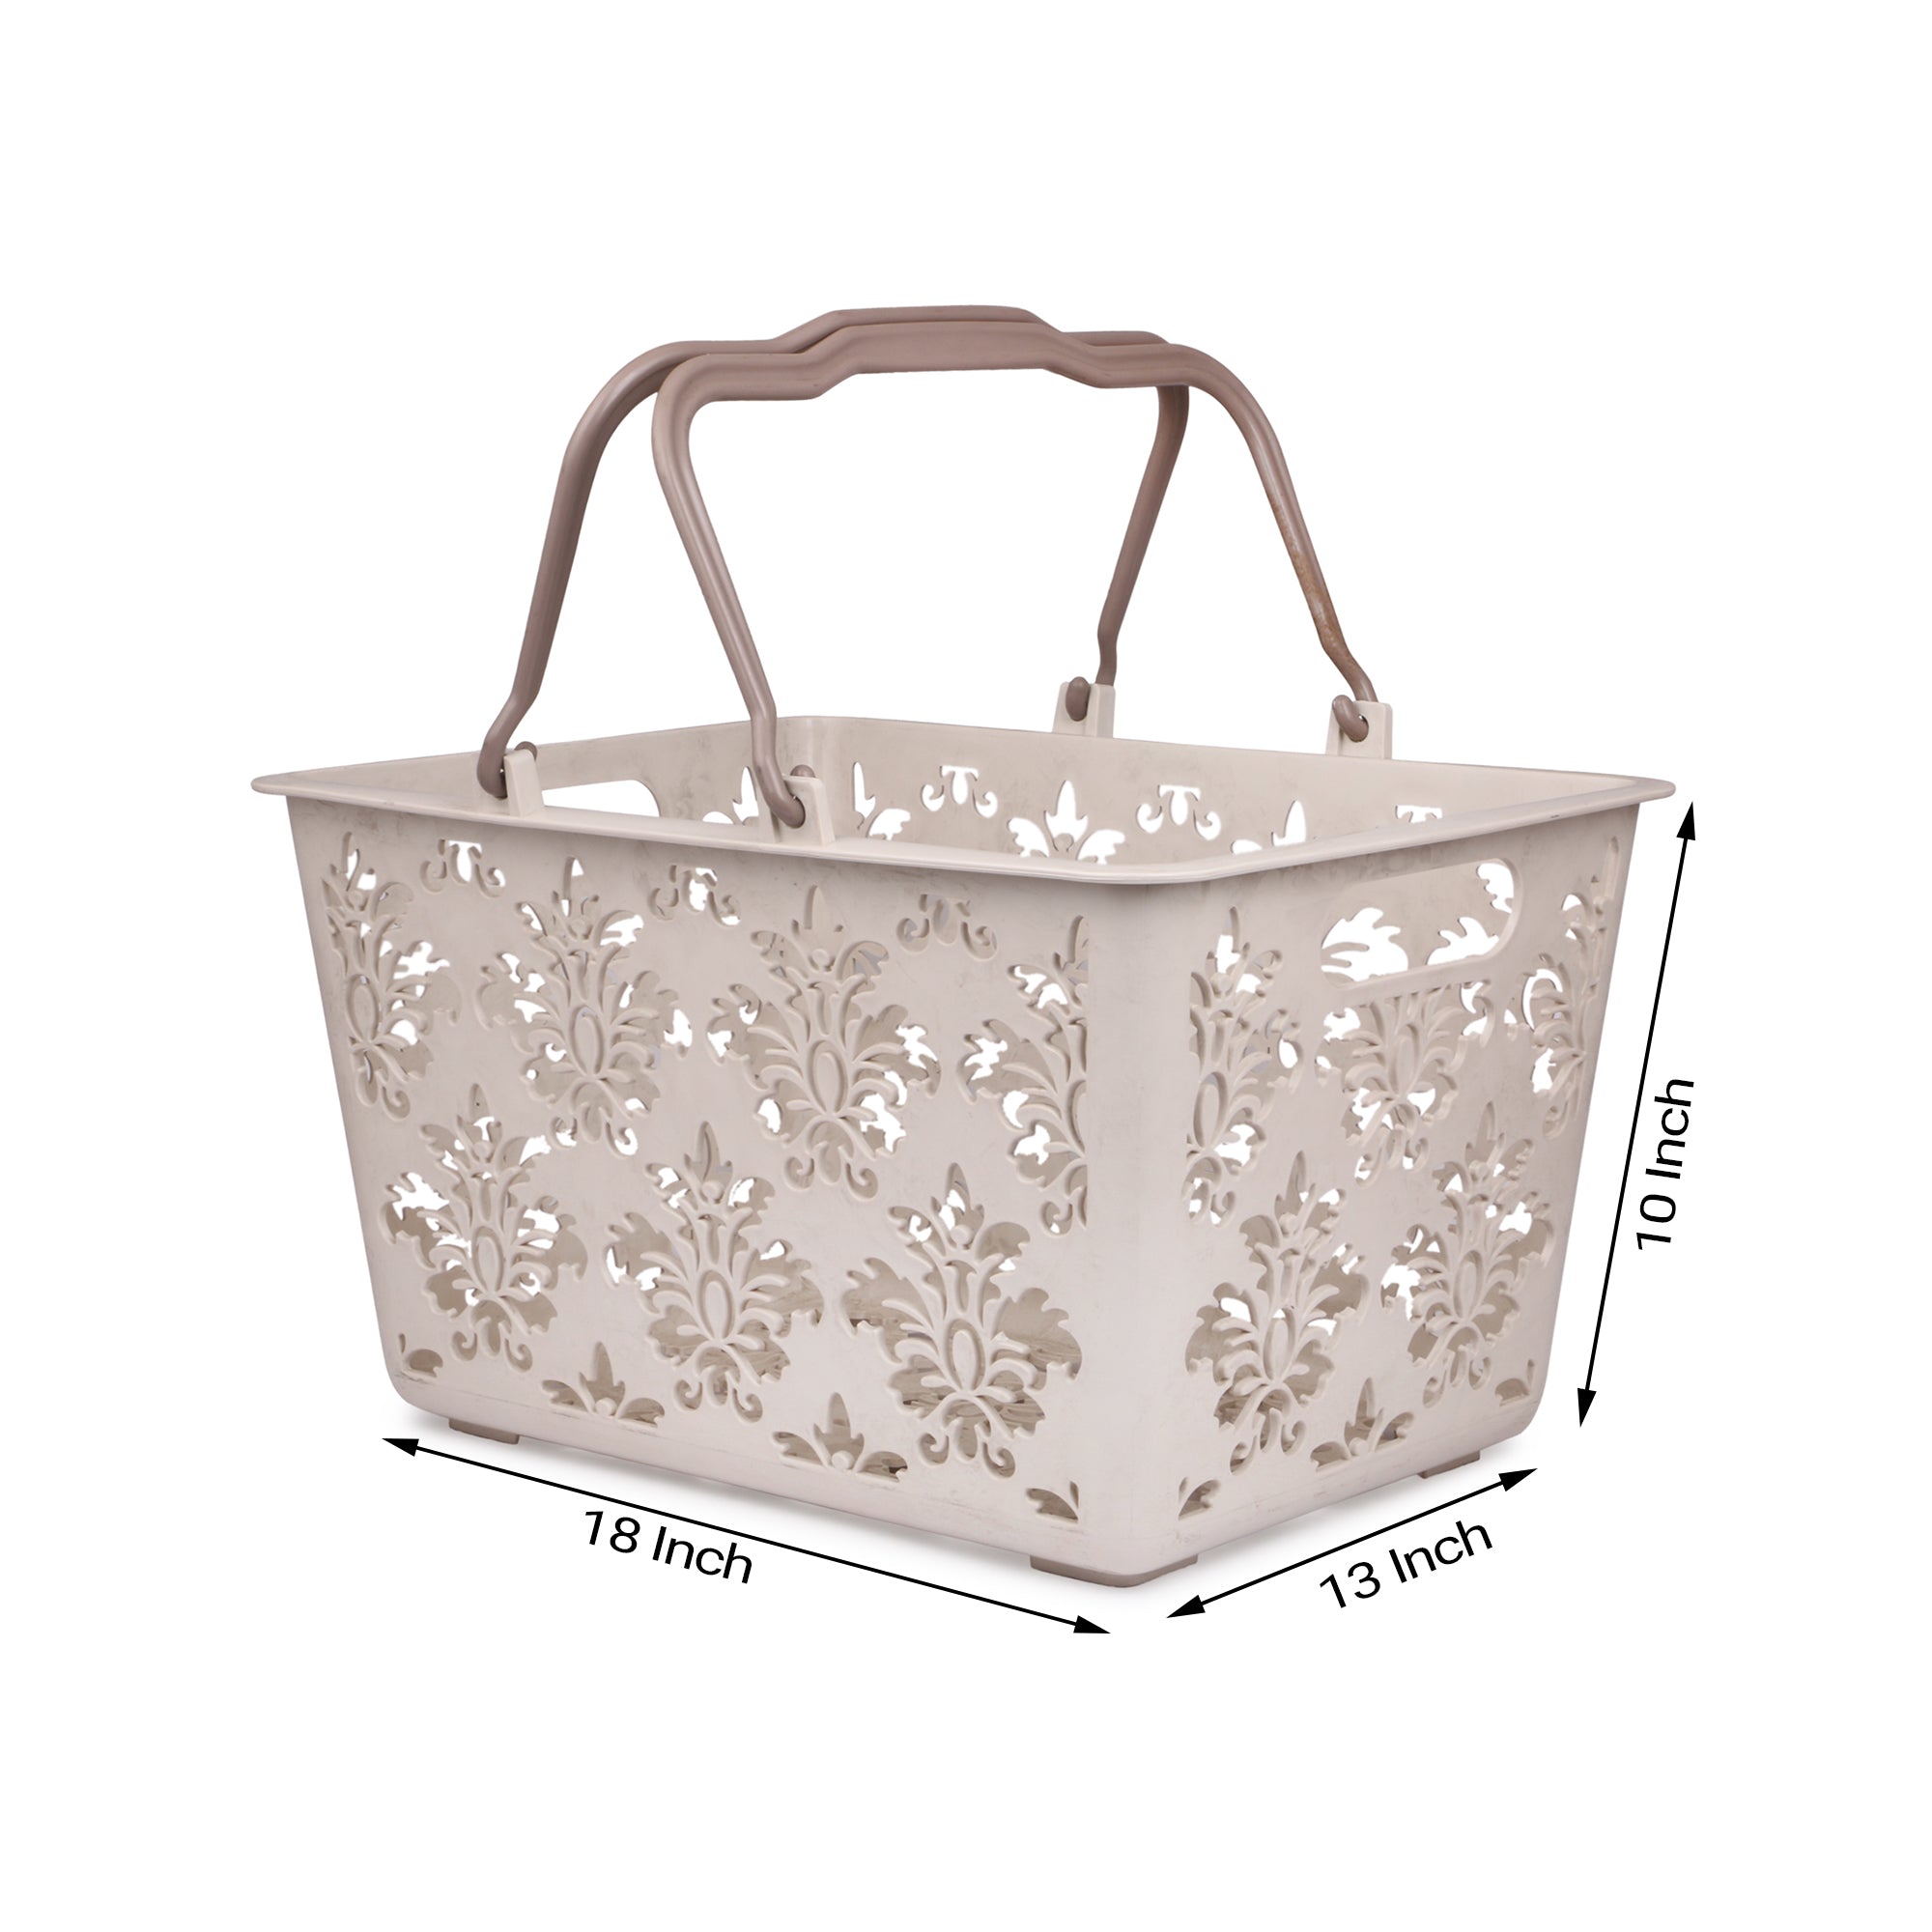 Plastic Lunch Basket  for Office, Home and Picnic Use. (18x13x10 Inch)